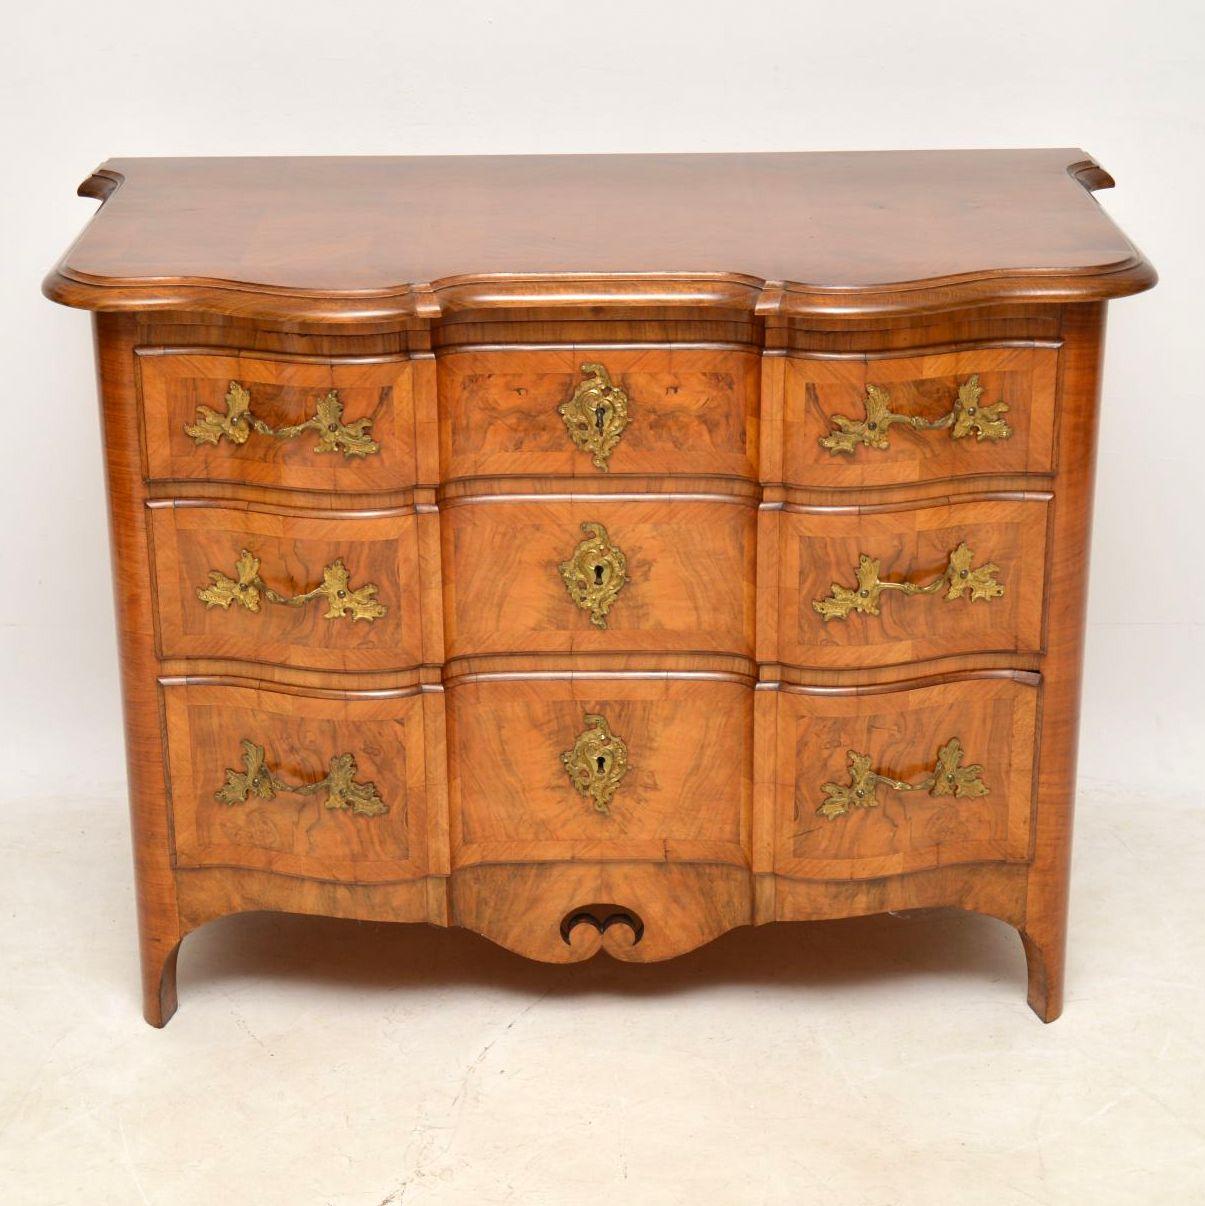 This Swedish antique walnut commode has a lovely shape and is excellent quality. It’s also rare to find these without marble tops. The top and sides are made up with different sections of walnut panels. The front section has an inverted serpentine